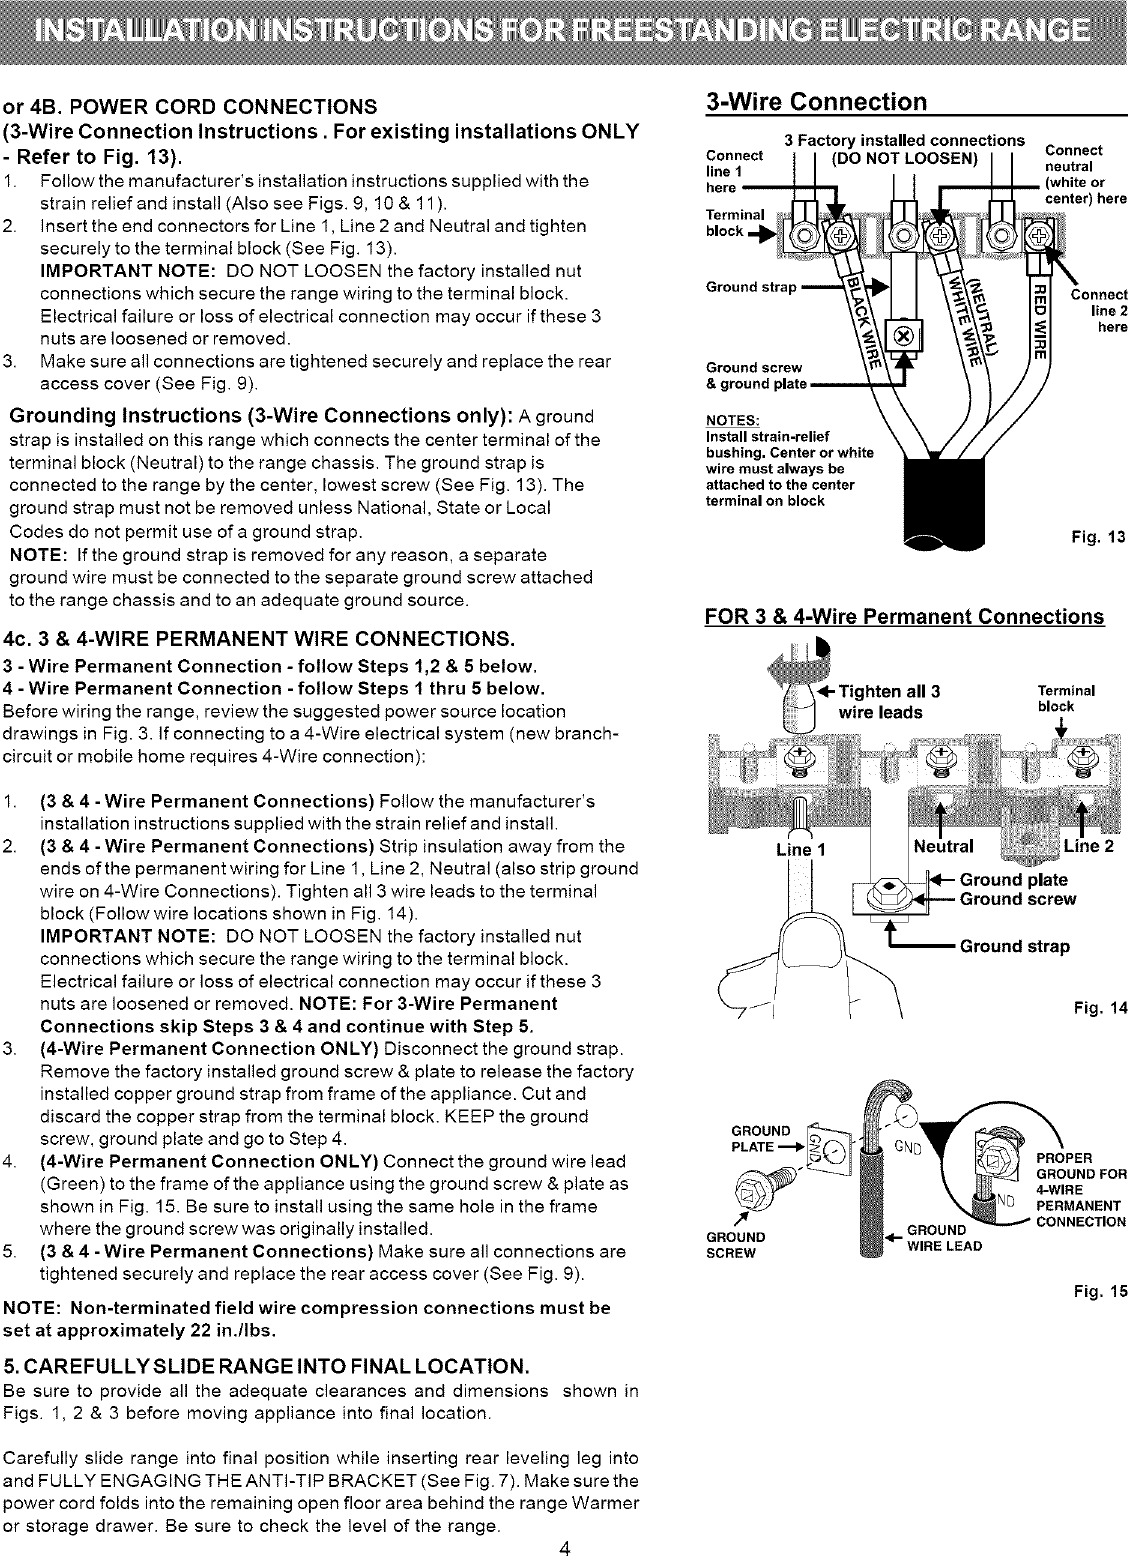 Page 5 of 6 - Electrolux EI30EF55GSA User Manual  ELECTRIC RANGE - Manuals And Guides L0804351